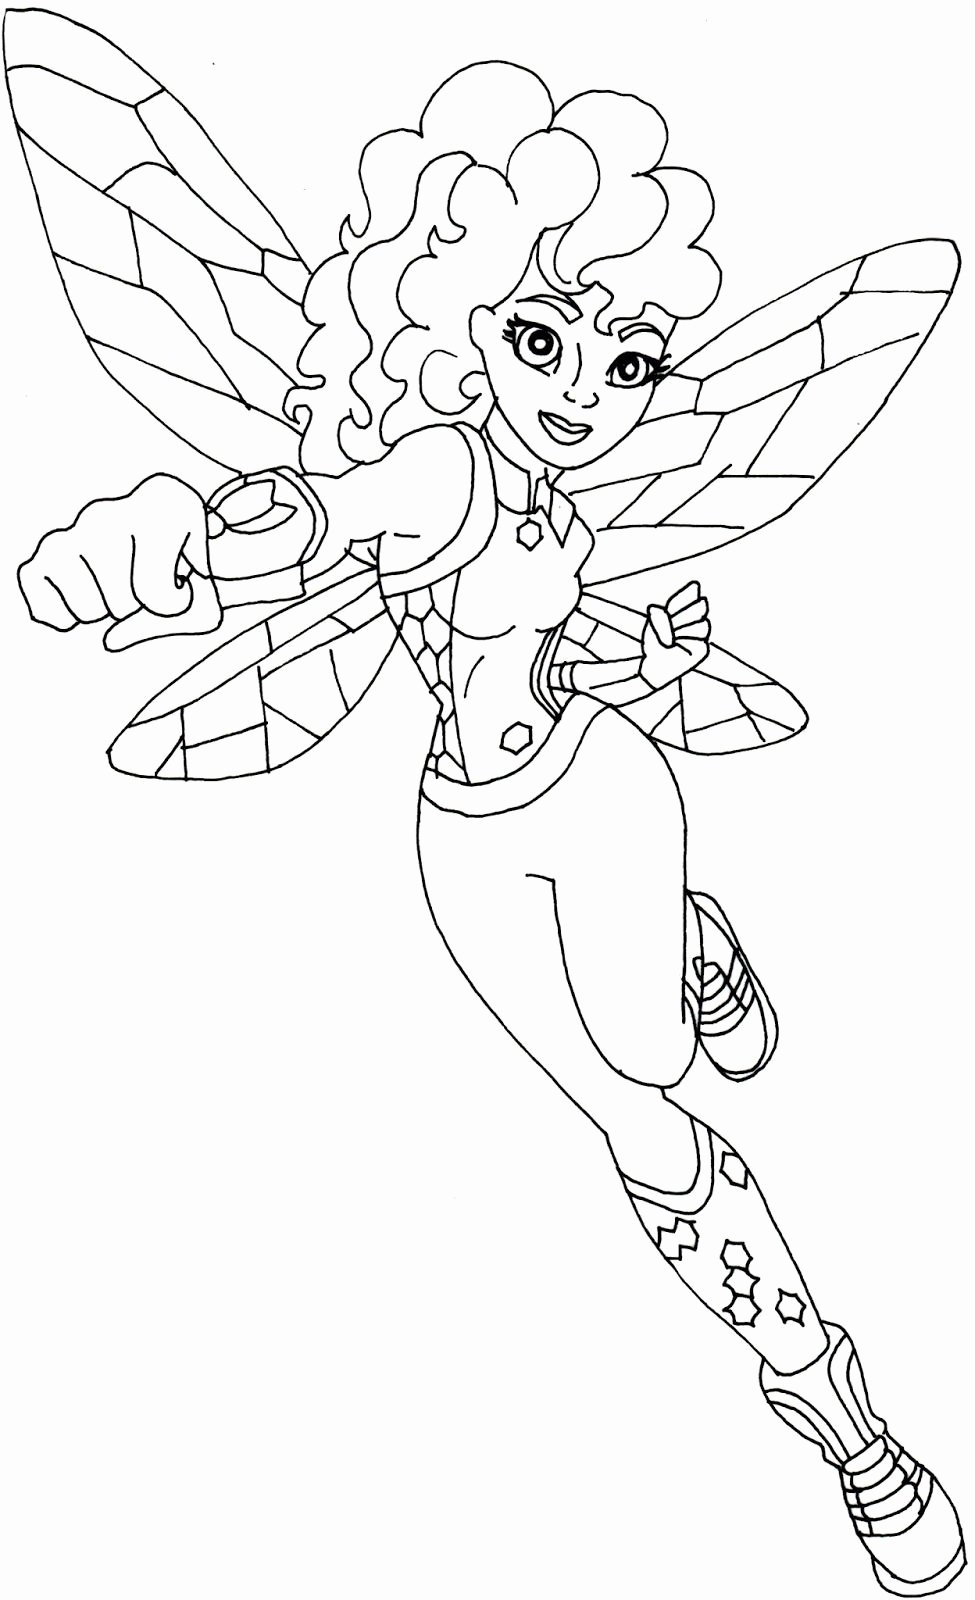 Female Superhero Coloring Pages Elegant Free Printable Super Hero High Coloring Page for Bumblebee Below is Bigger but It S In Half